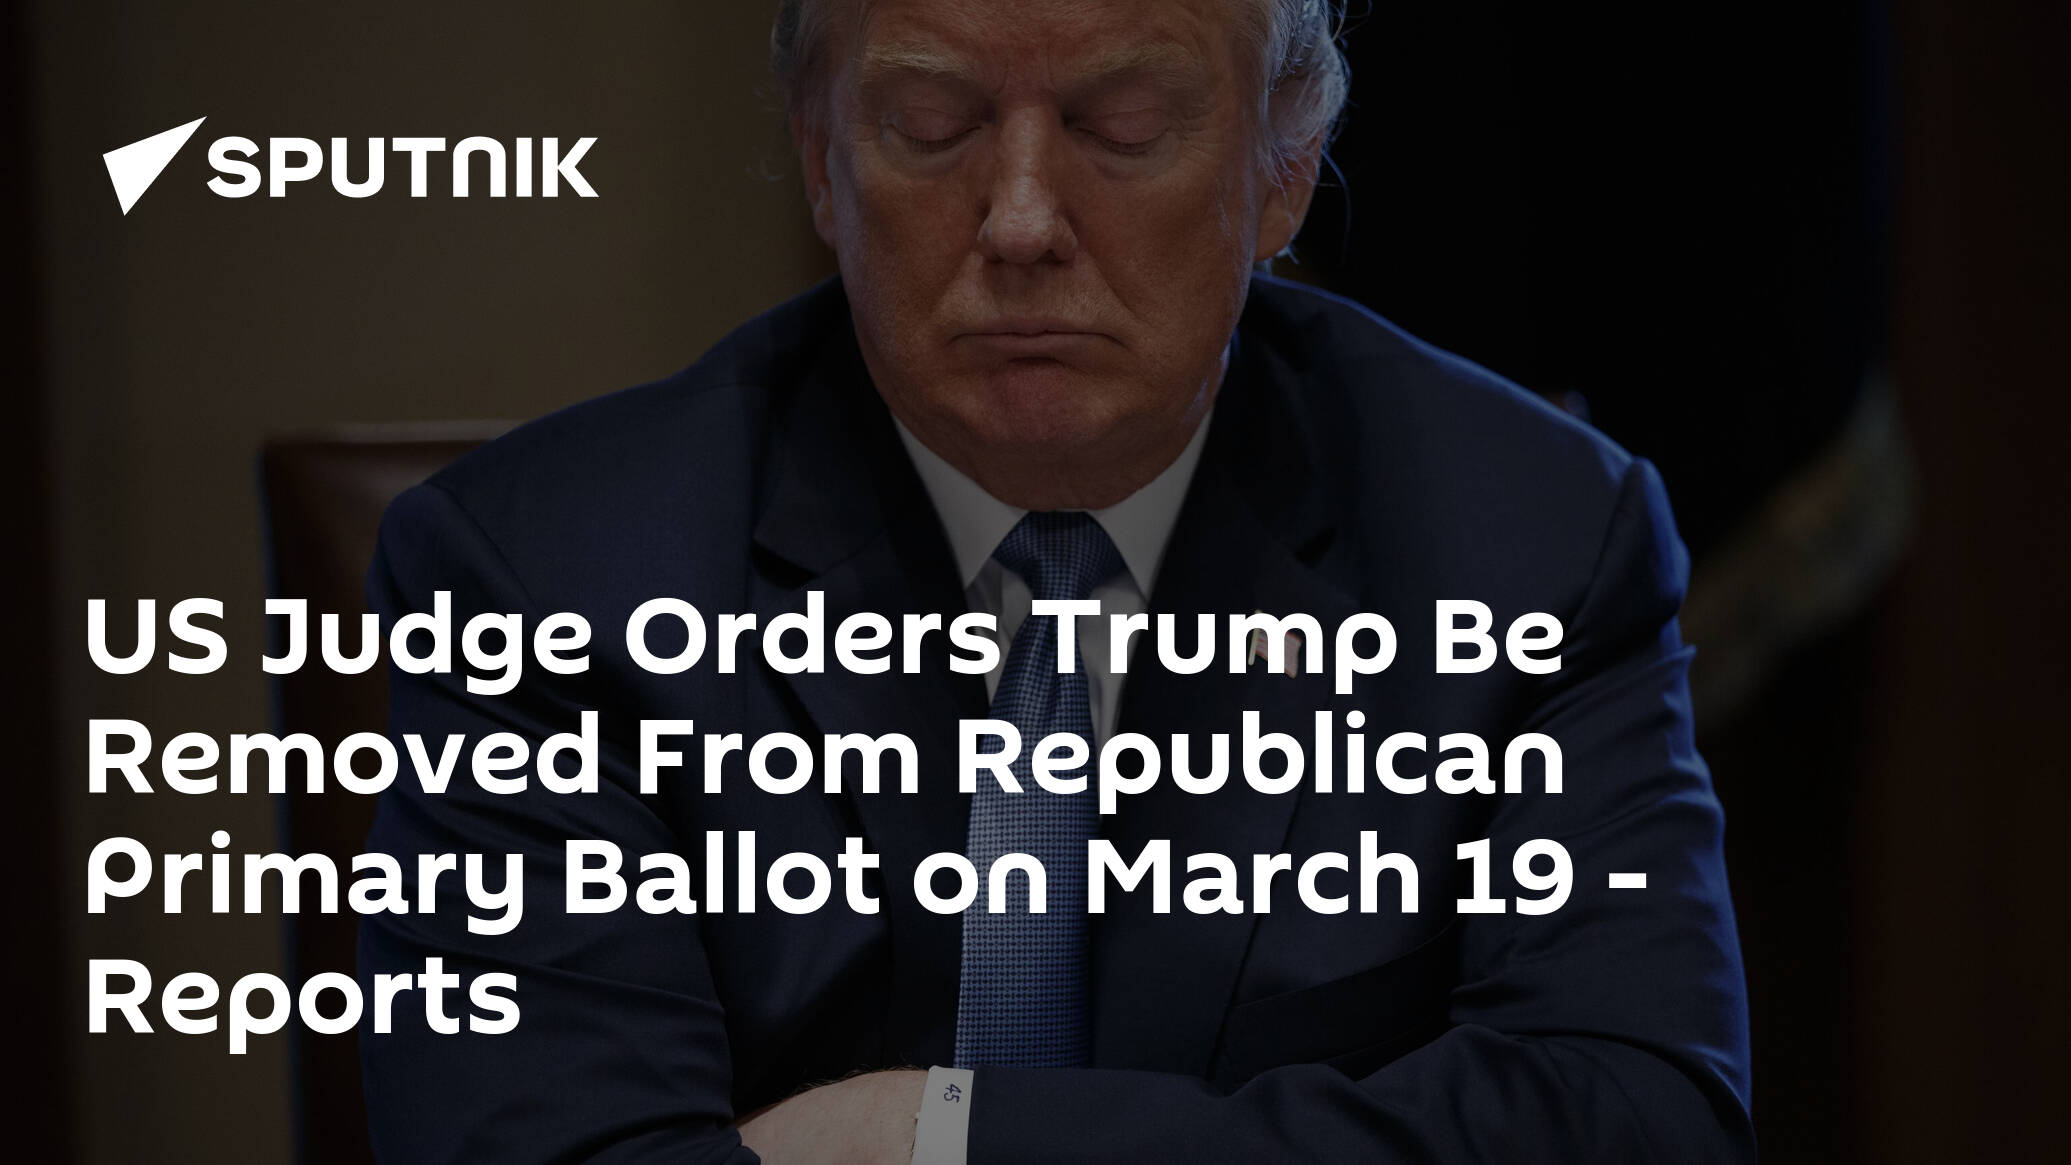 US Judge Orders Trump Be Removed From Republican Primary Ballot on March 19 – Reports